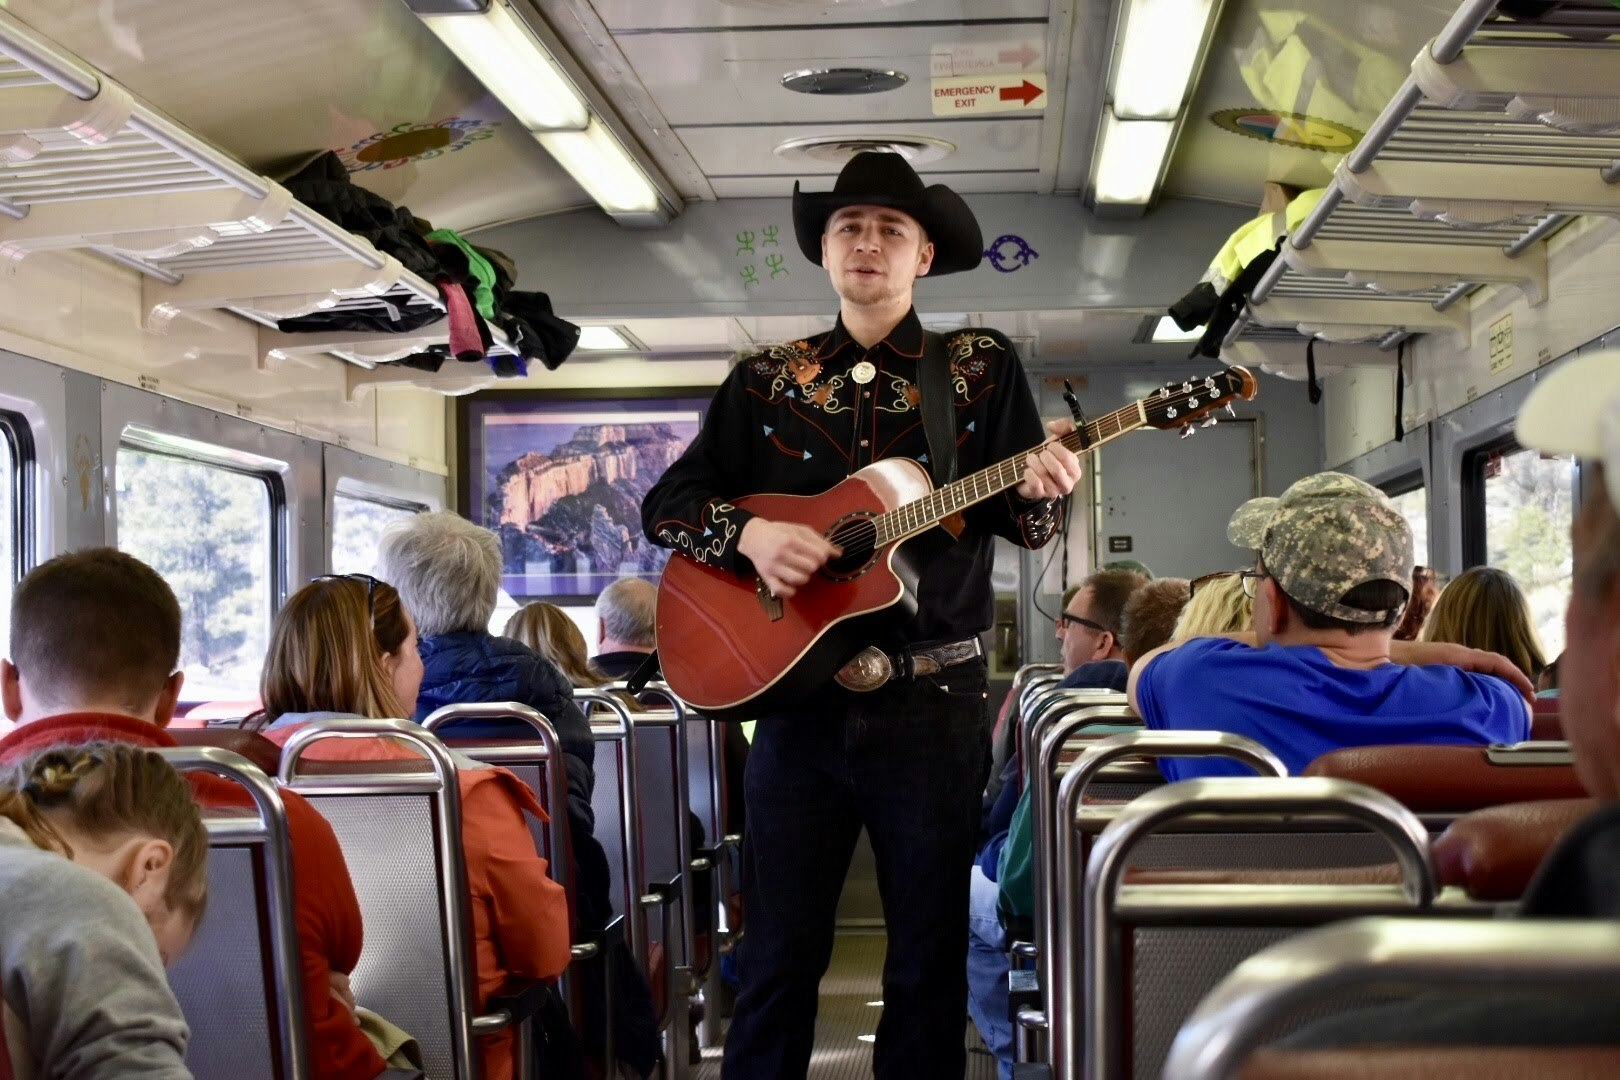 A young man in an embroidered shirt and black cowboy hat strums a guitar and sings in a train car